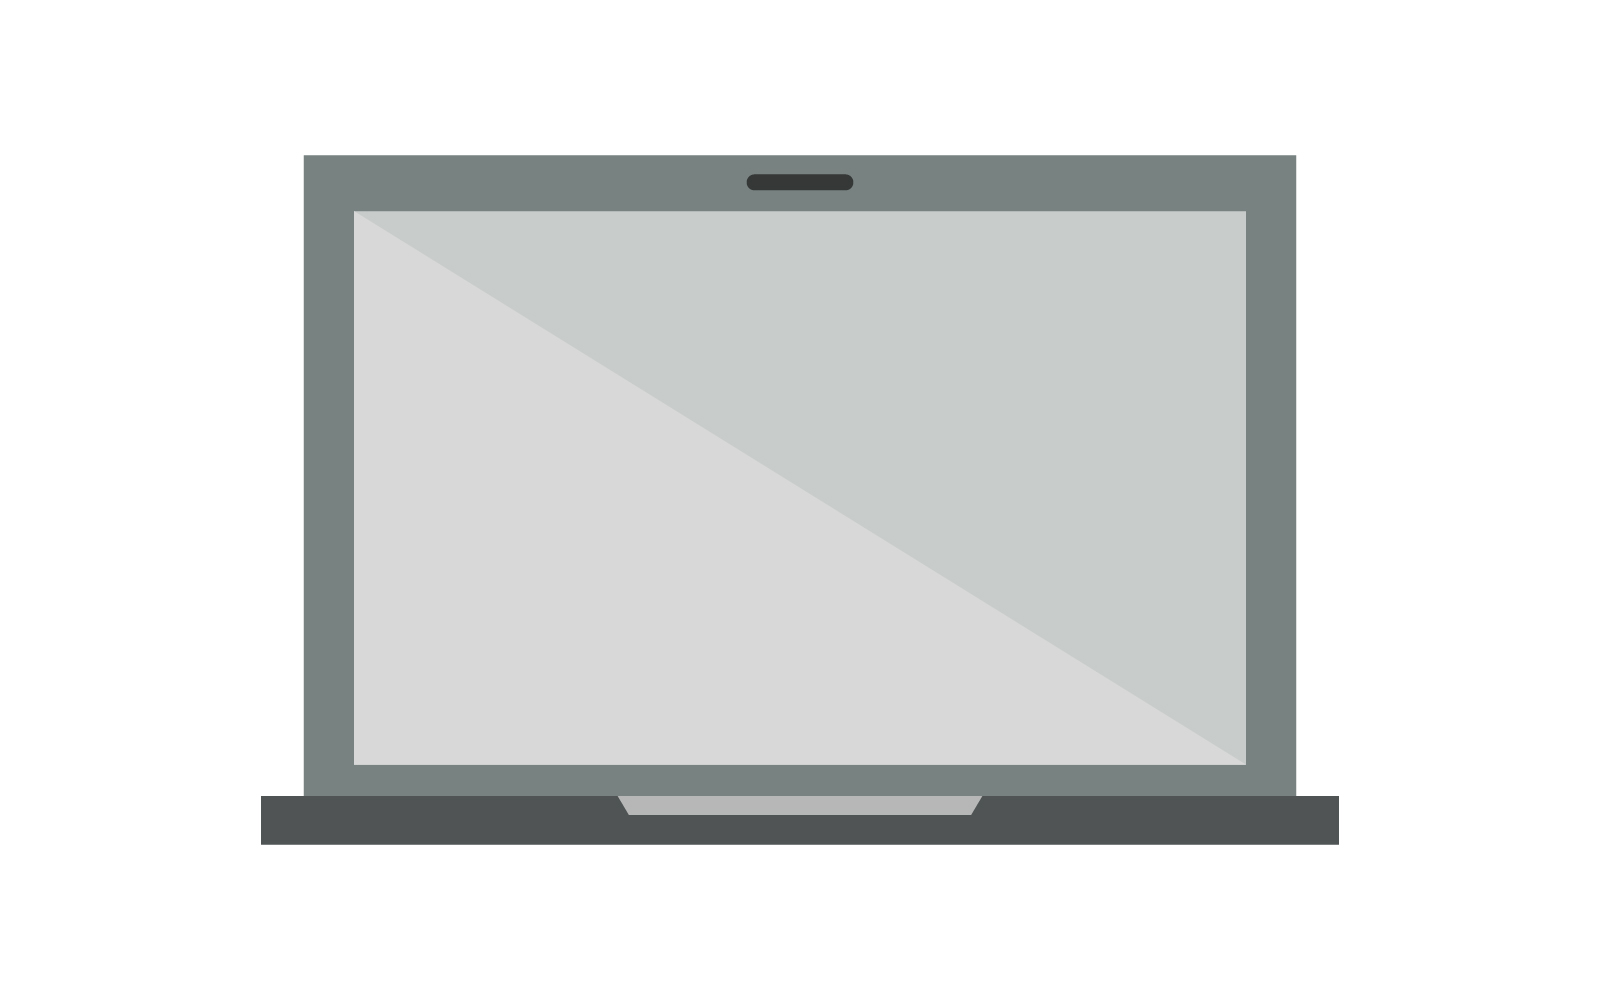 Laptop illustrated in vector on white and colored background